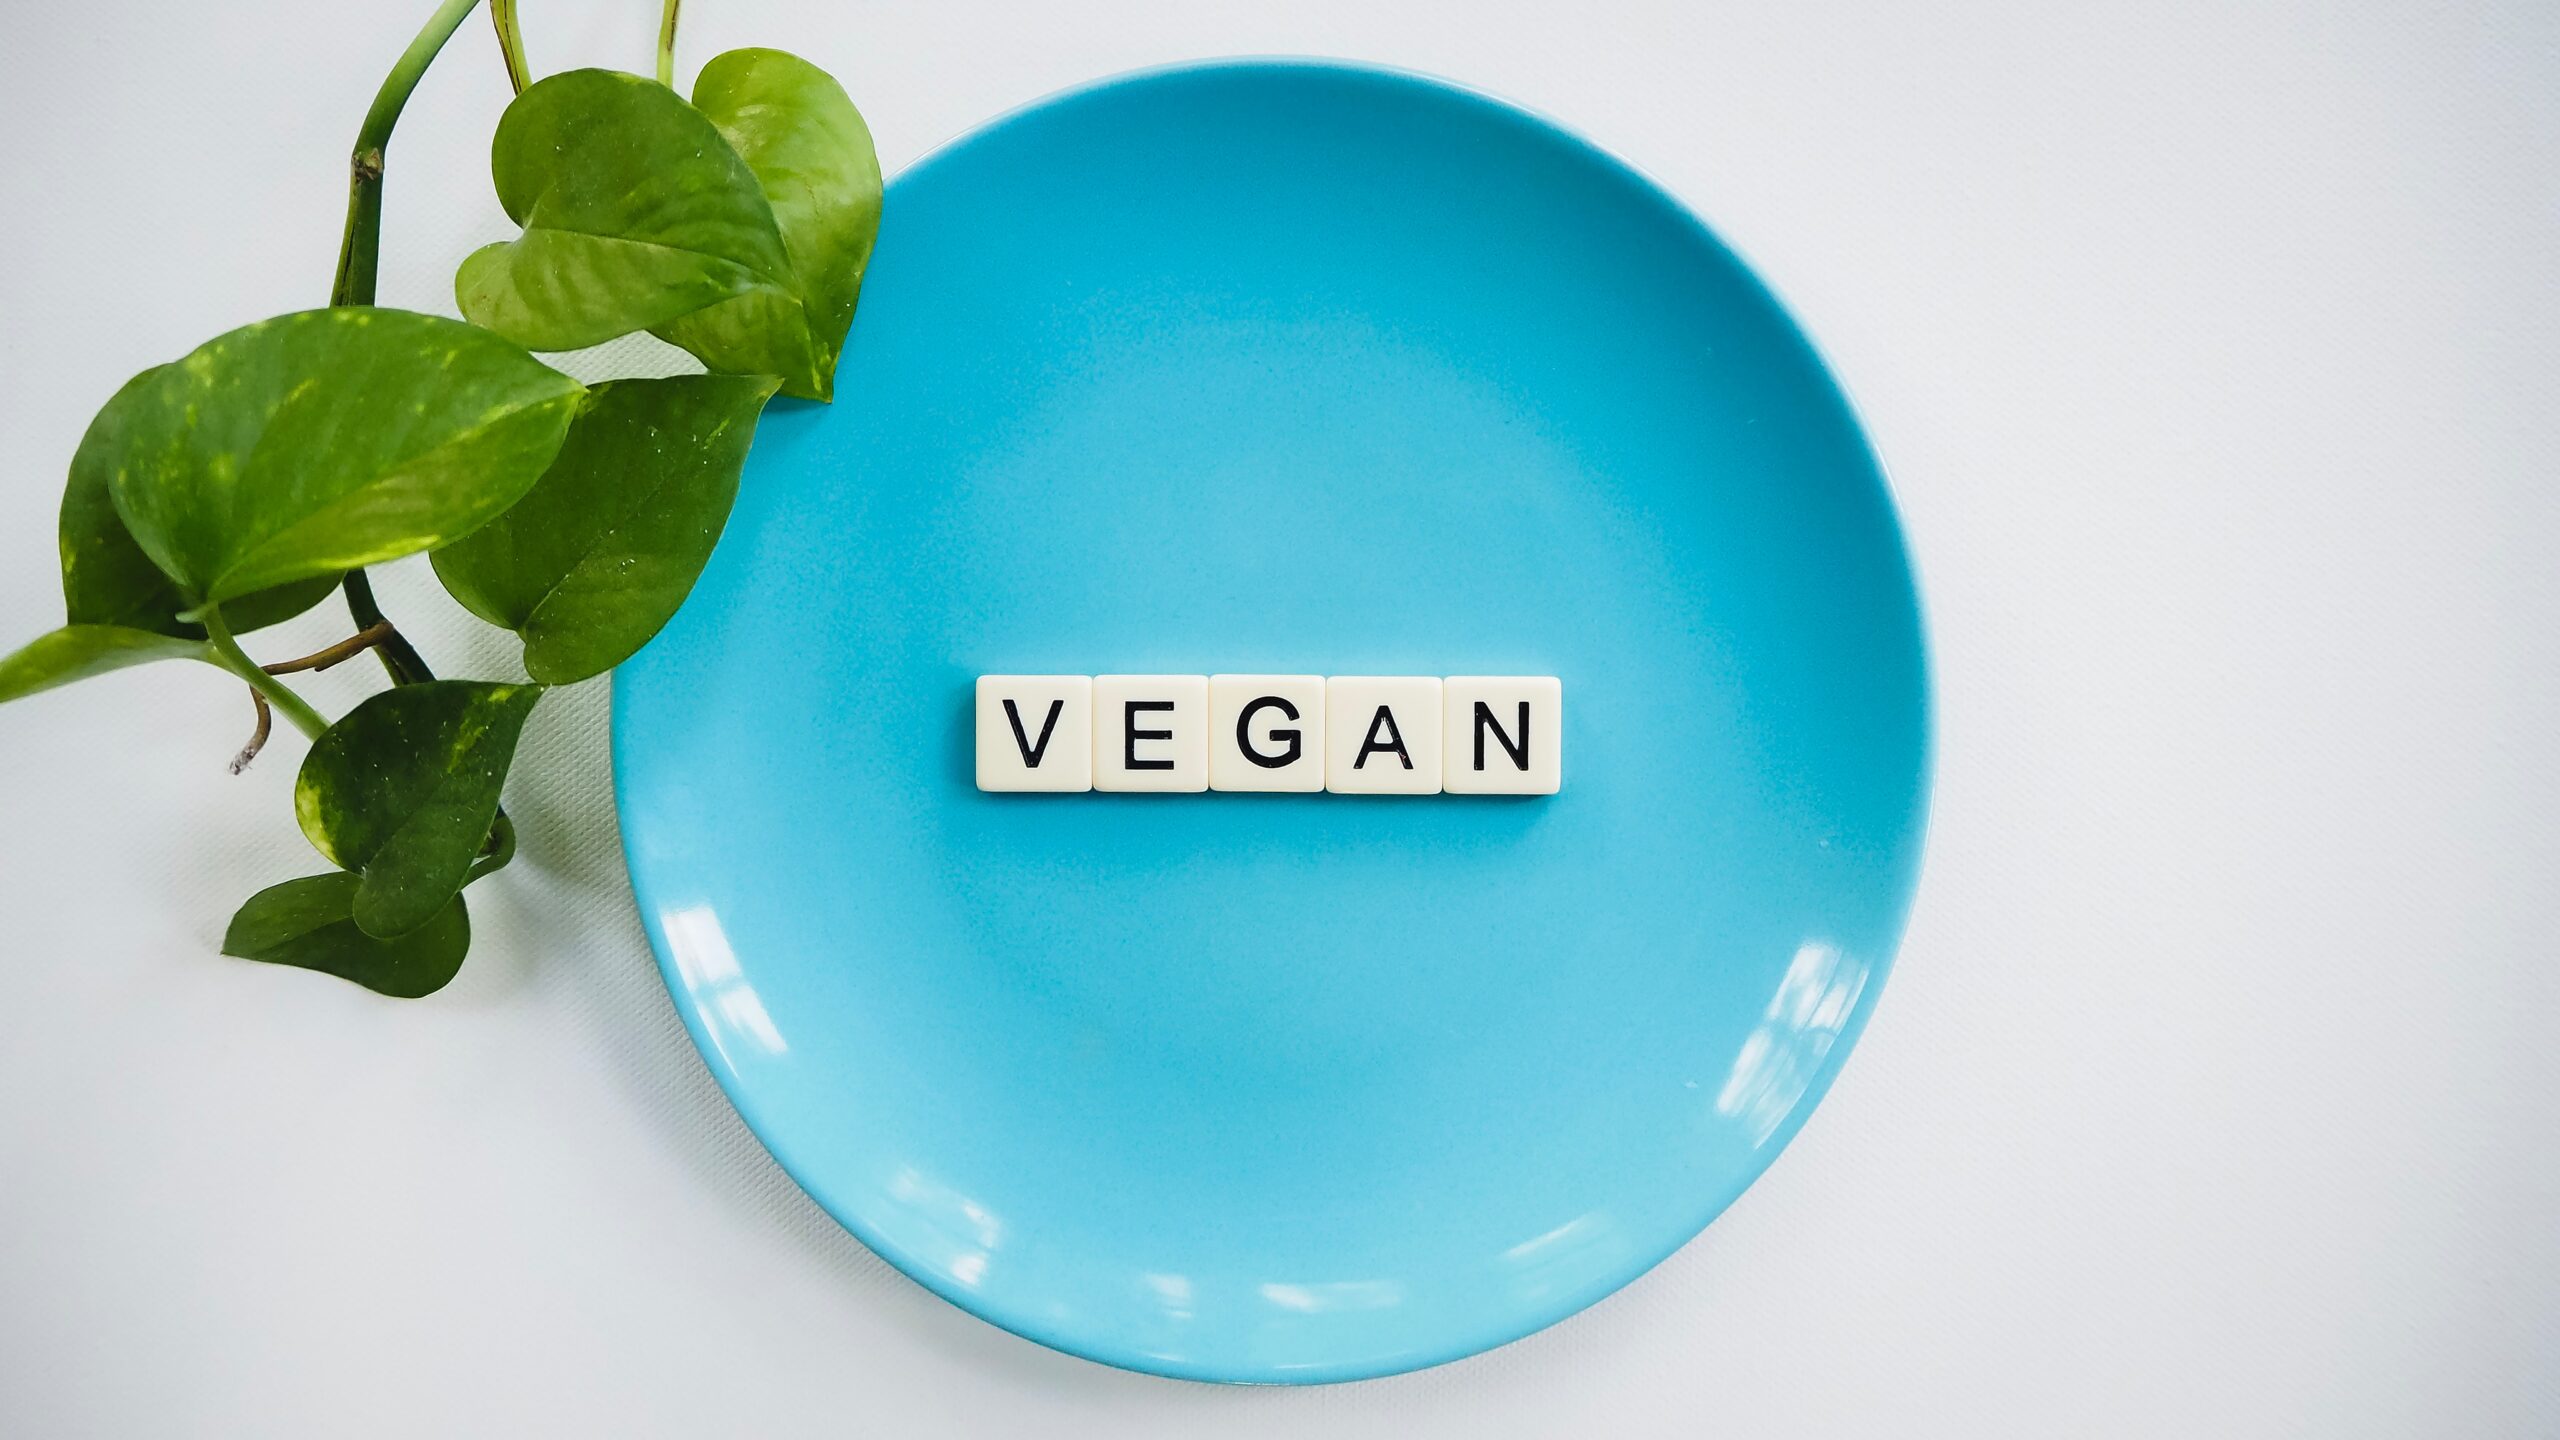 Vegan Diet – May Be What You Need to Lose Weight